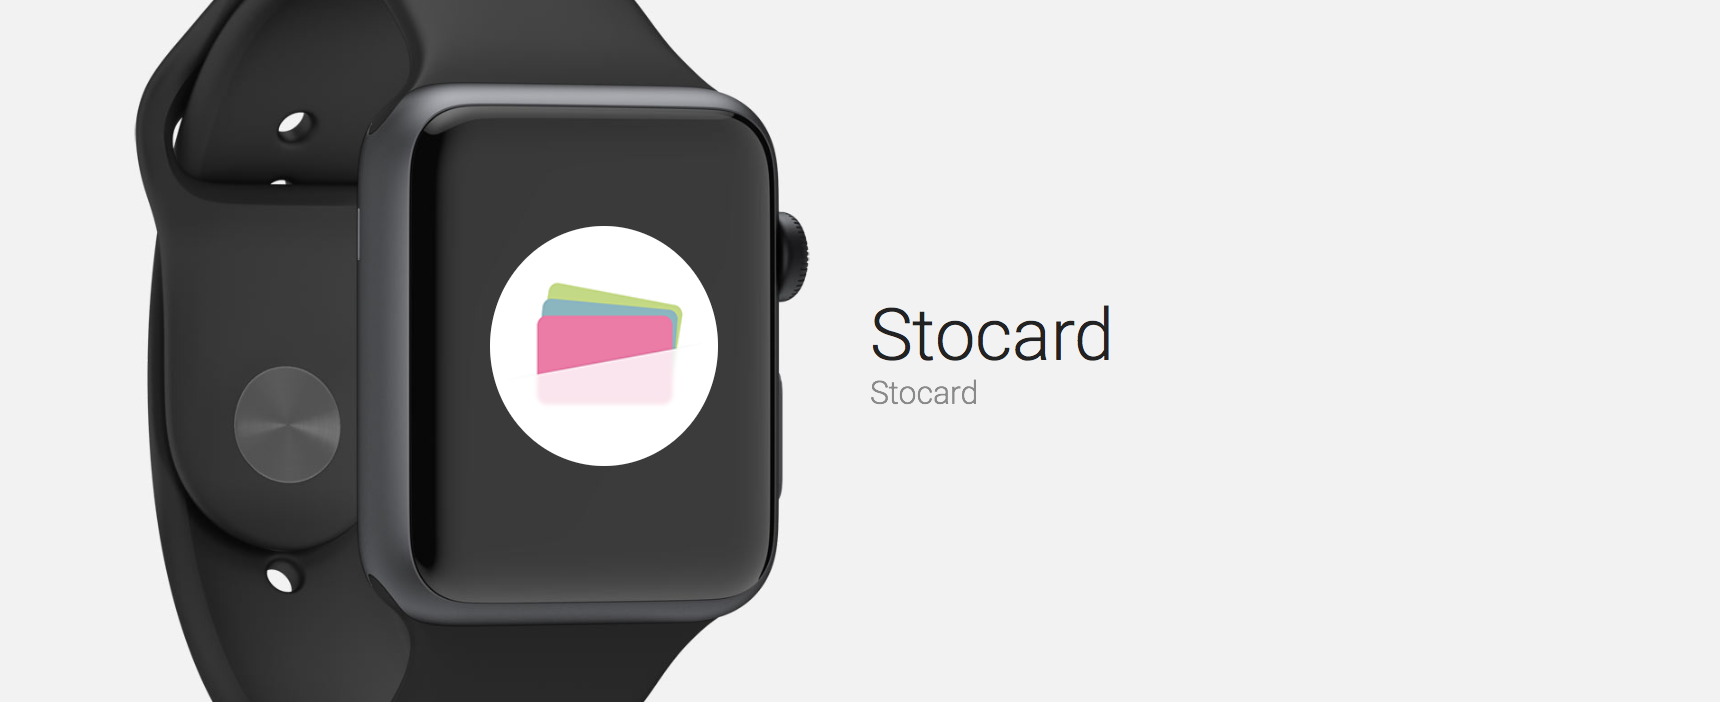 Stocard Stores Your Loyalty Cards on the Apple Watch